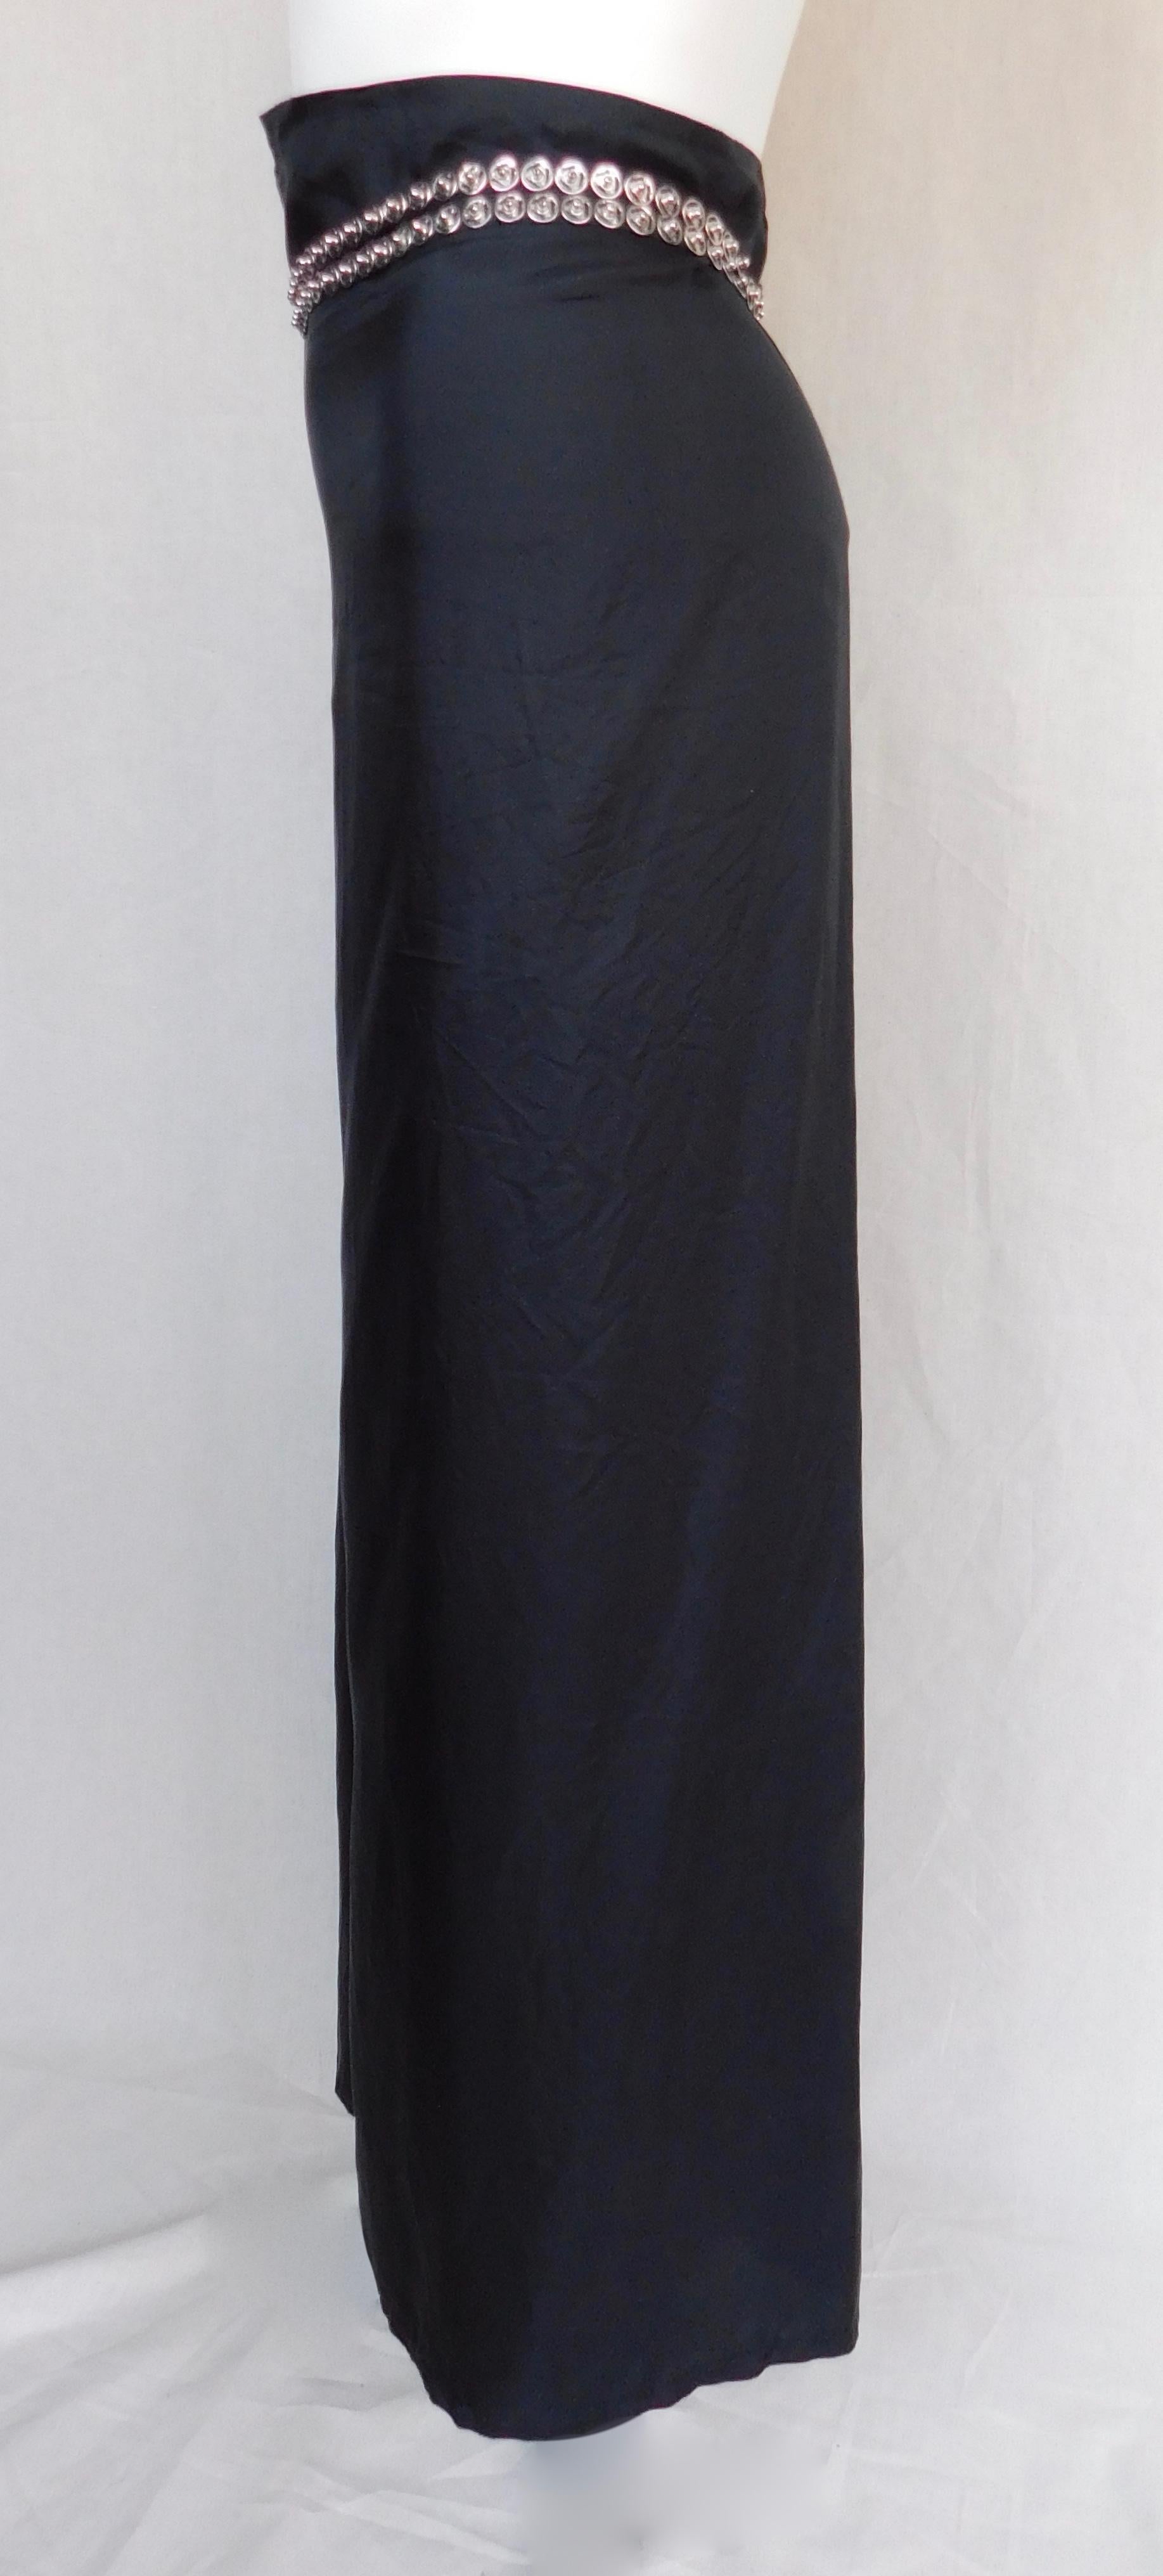 Ann Demeulemeester long black wrap around skirt with attached belt sash made of multiple steel snaps. The size is marked EU 42, but Because of the wrap around nature of this skirt it is  